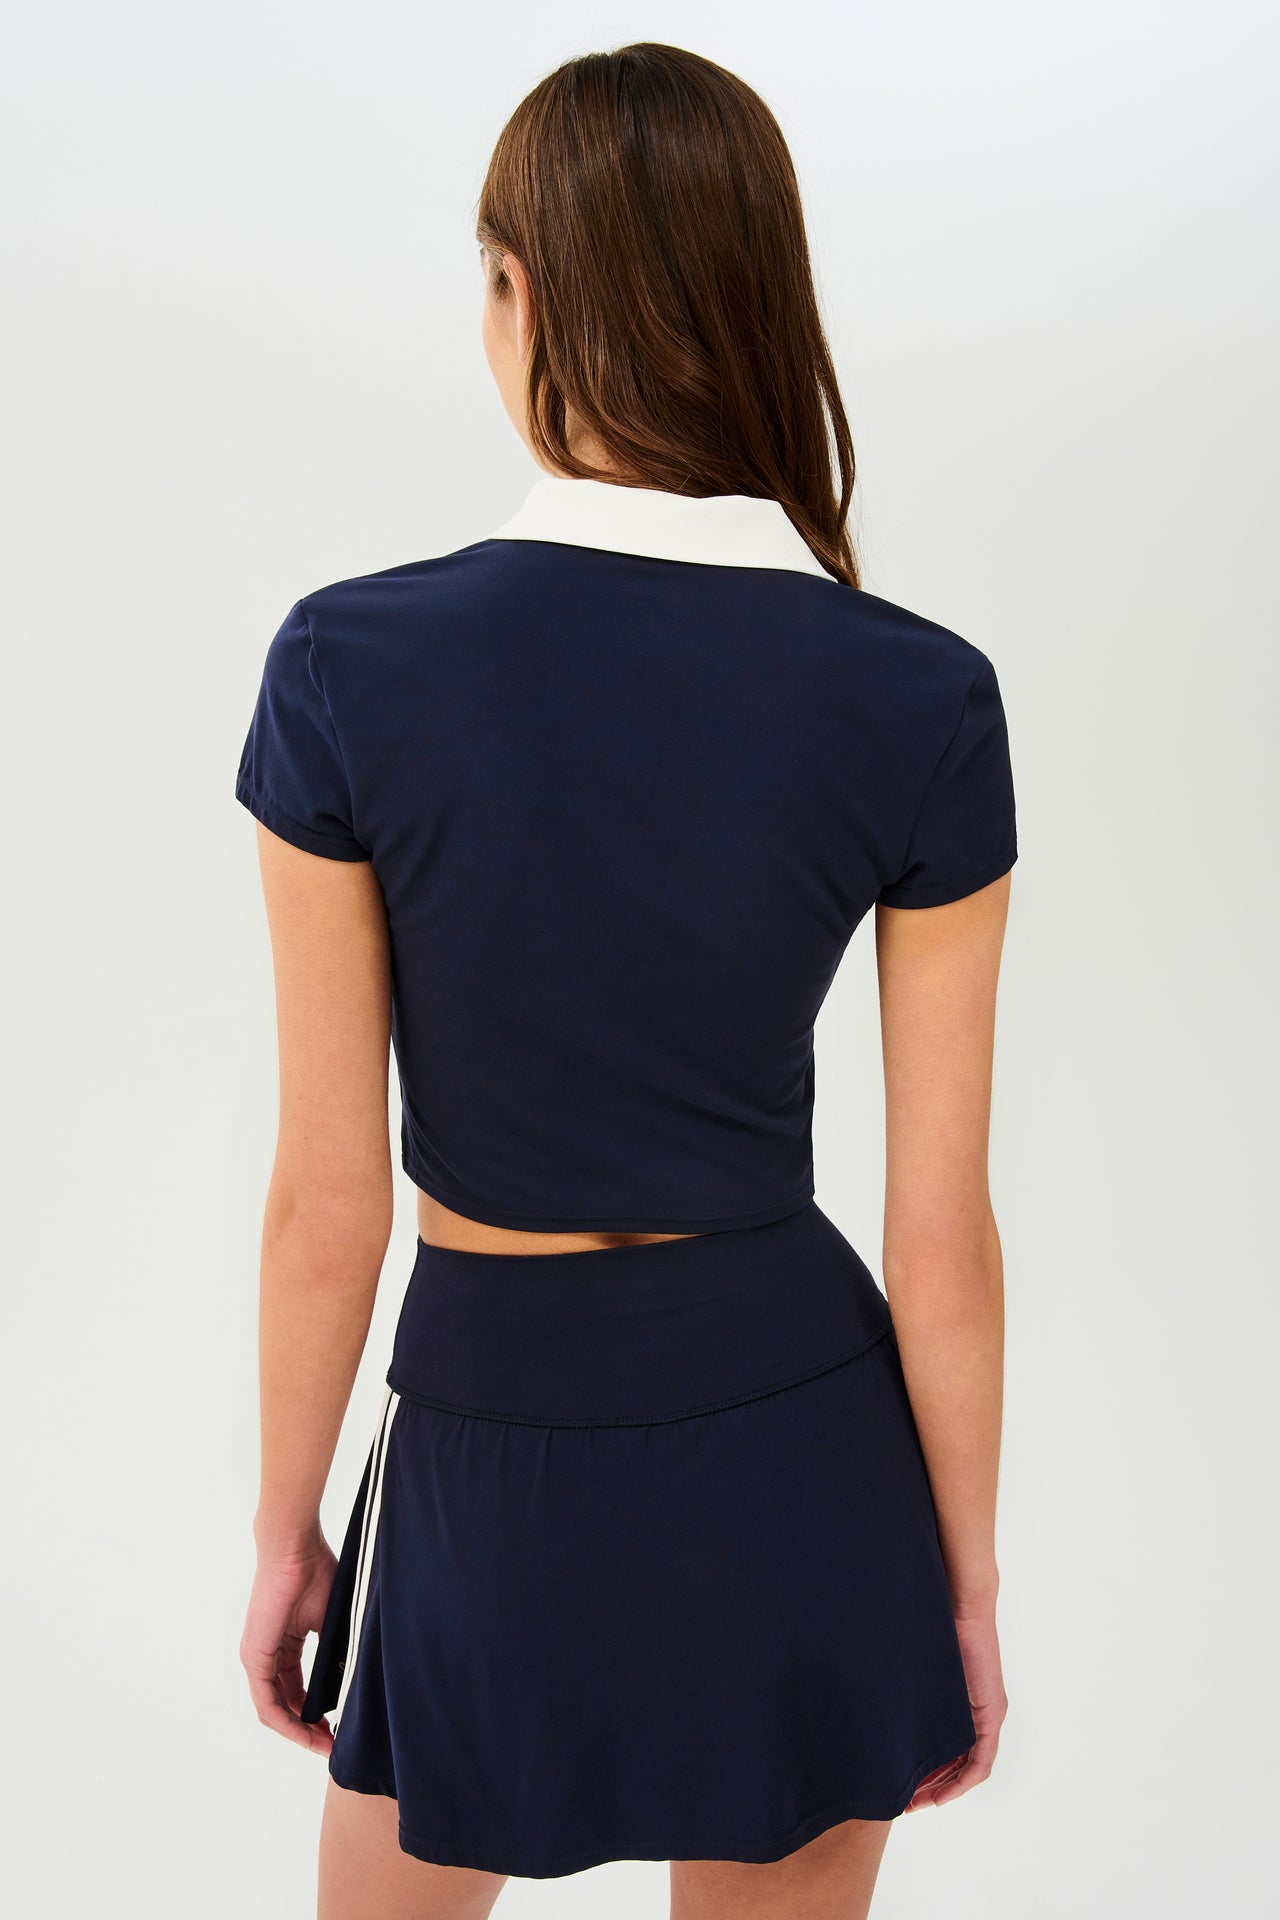 Back view of girl wearing cropped dark blue shirt with a white folded down collar and dark blue skirt with two withe stripes going down the side